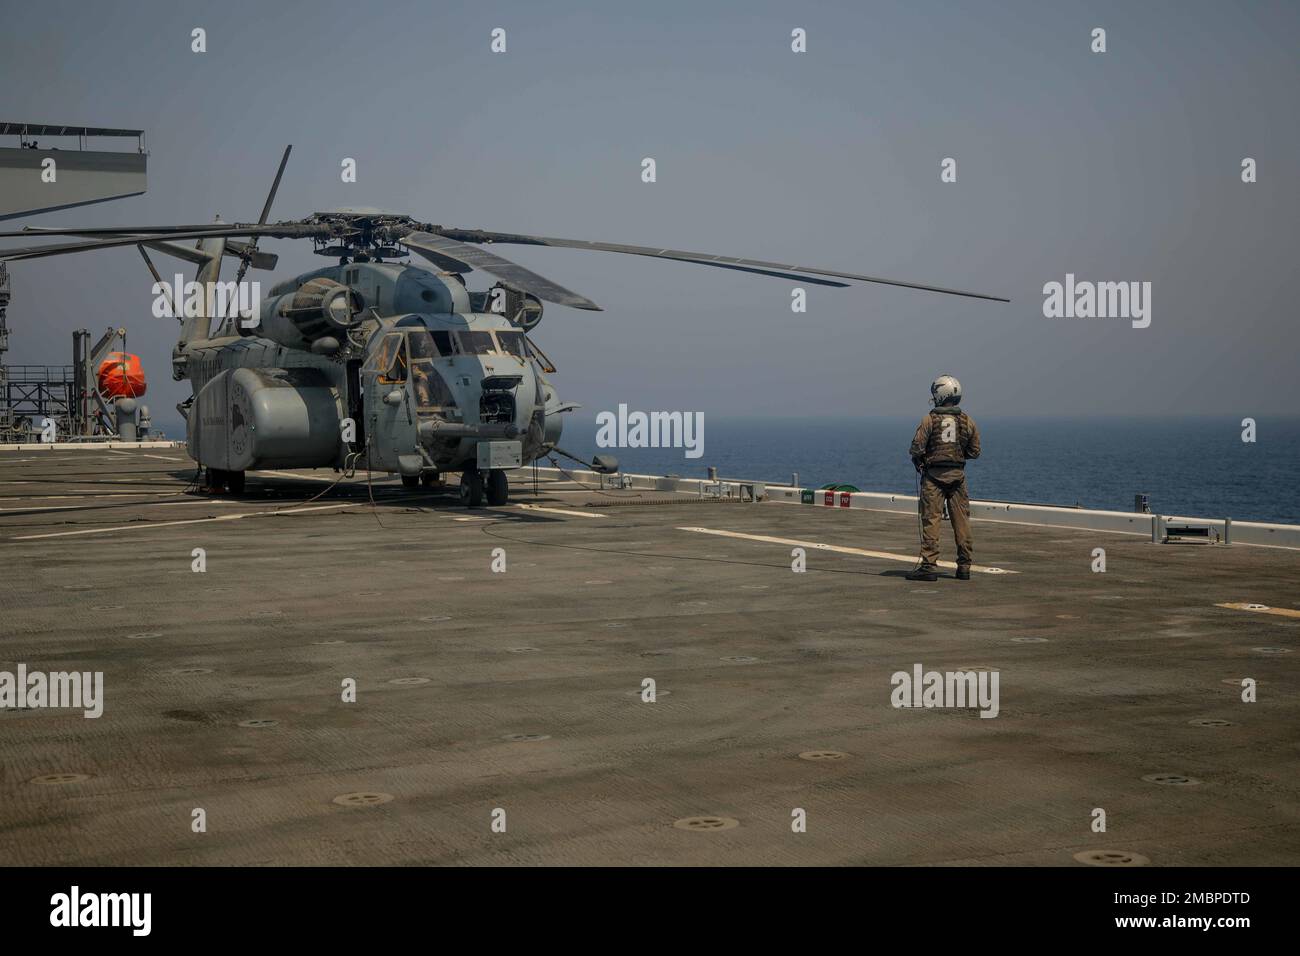 220618-A-EQ028-1184 ARABIAN GULF (June 18, 2022) Aviation Warfare Systems 3rd Class Kyle Gumz conducts preflight checks on an MH-53 Sea Dragon helicopter attached to the Blackhawks of Helicopter Mine Countermeasures (HM) Squadron 15, prior to flight operations aboard the expeditionary sea base USS Lewis B. Puller (ESB 3), during exercise Iron Defender in the Arabian Gulf, June 18. Iron Defender is an annual bilateral training event between U.S. Naval Forces Central Command and forces from the United Arab Emirates. The exercise focuses on maritime security operations, mine countermeasures, and Stock Photo